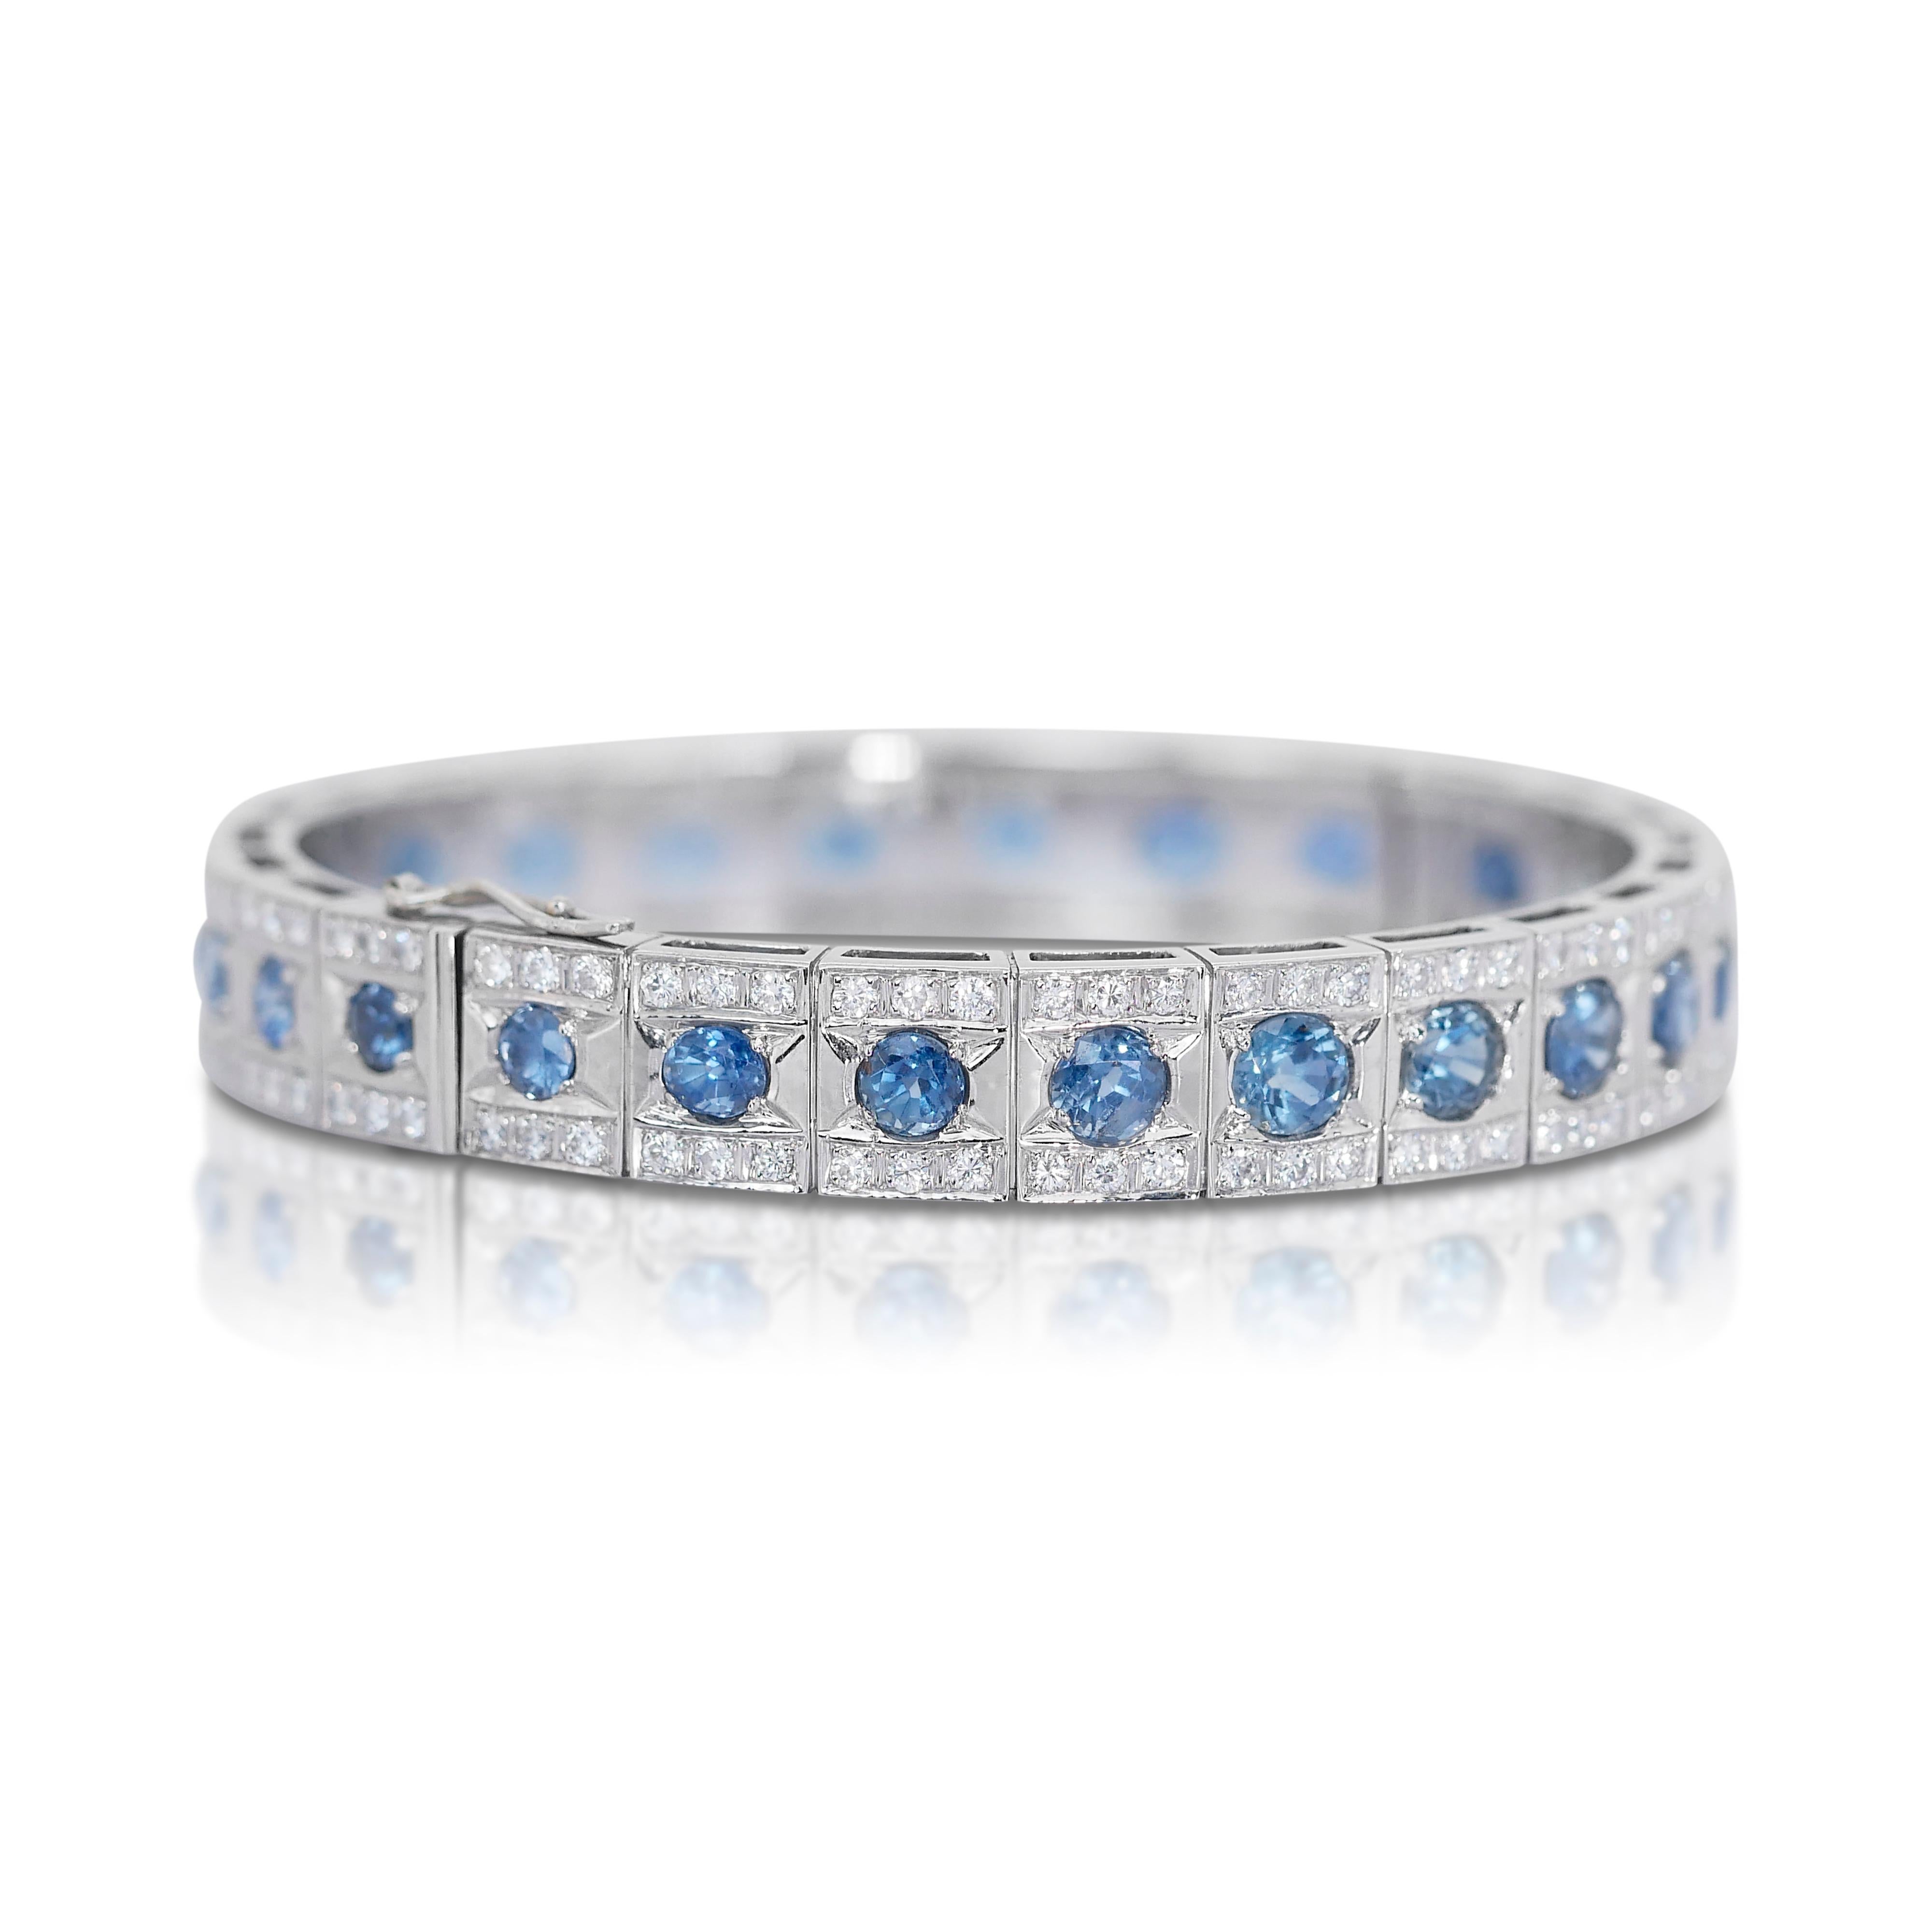 Celestial Blue: 18k White Gold Sapphire and Diamond Tennis Bracelet w/22.66 ct - IGI Certified 

Introducing the celestial blue tennis bracelet, a masterpiece of unparalleled beauty and craftsmanship. At the center of this design are 19 oval